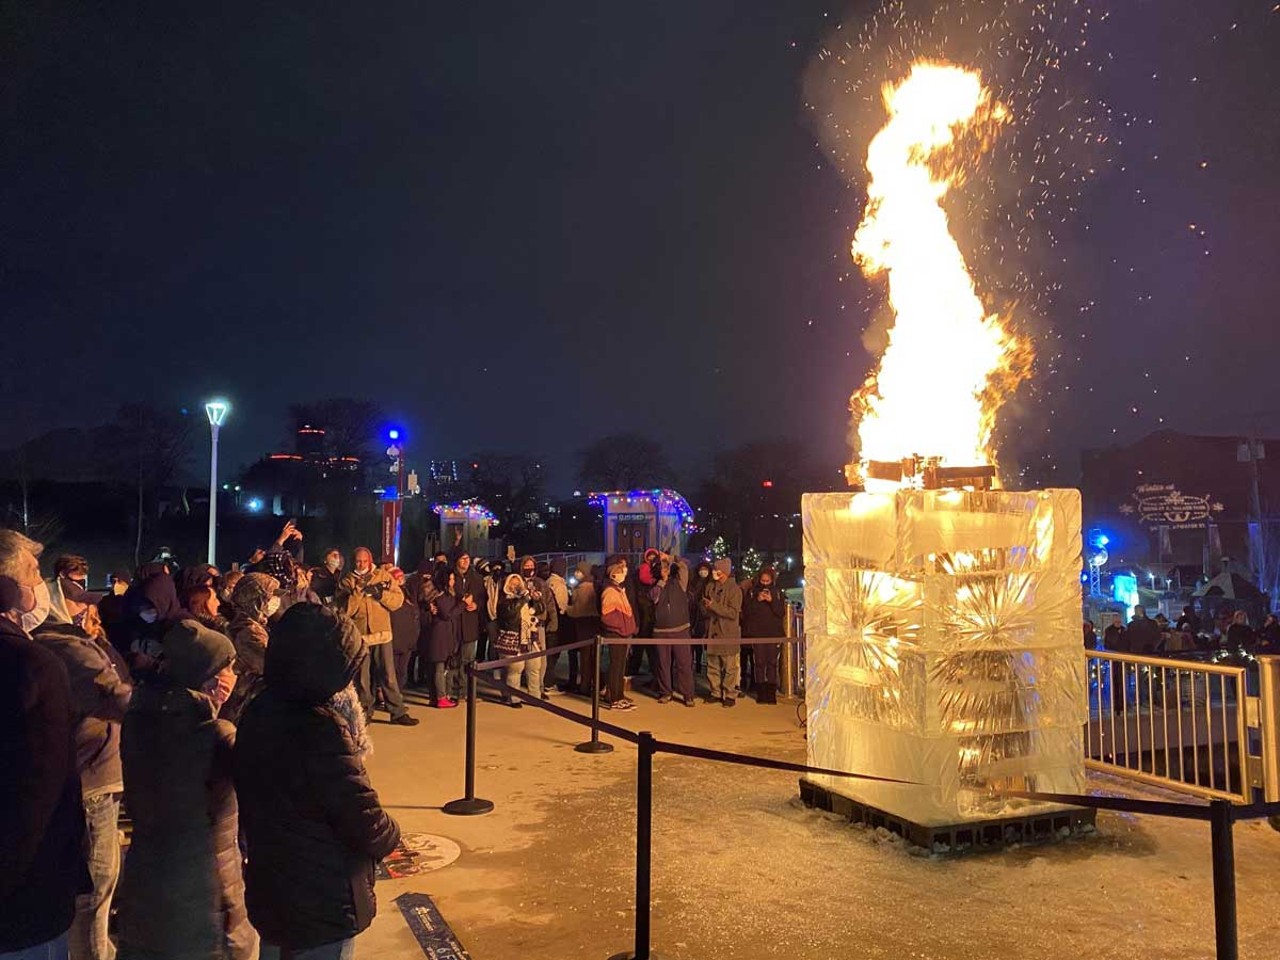 
Check out activities at Valade Park
Family-friendly events on the riverfront don't stop when it's cold outside. The Detroit Riverfront Conservancy hosts "Winter at Valade" activities and themed weekends at Valade Park (2670 Atwater St., Detroit; detroitriverfront.org/winteratvalade). Visitors of all ages can enjoy bonfires, sledding, s'mores, games, food, warm drinks, and more. Plus, every Friday will include special programming such as open mic nights, trivia, and board games. 
